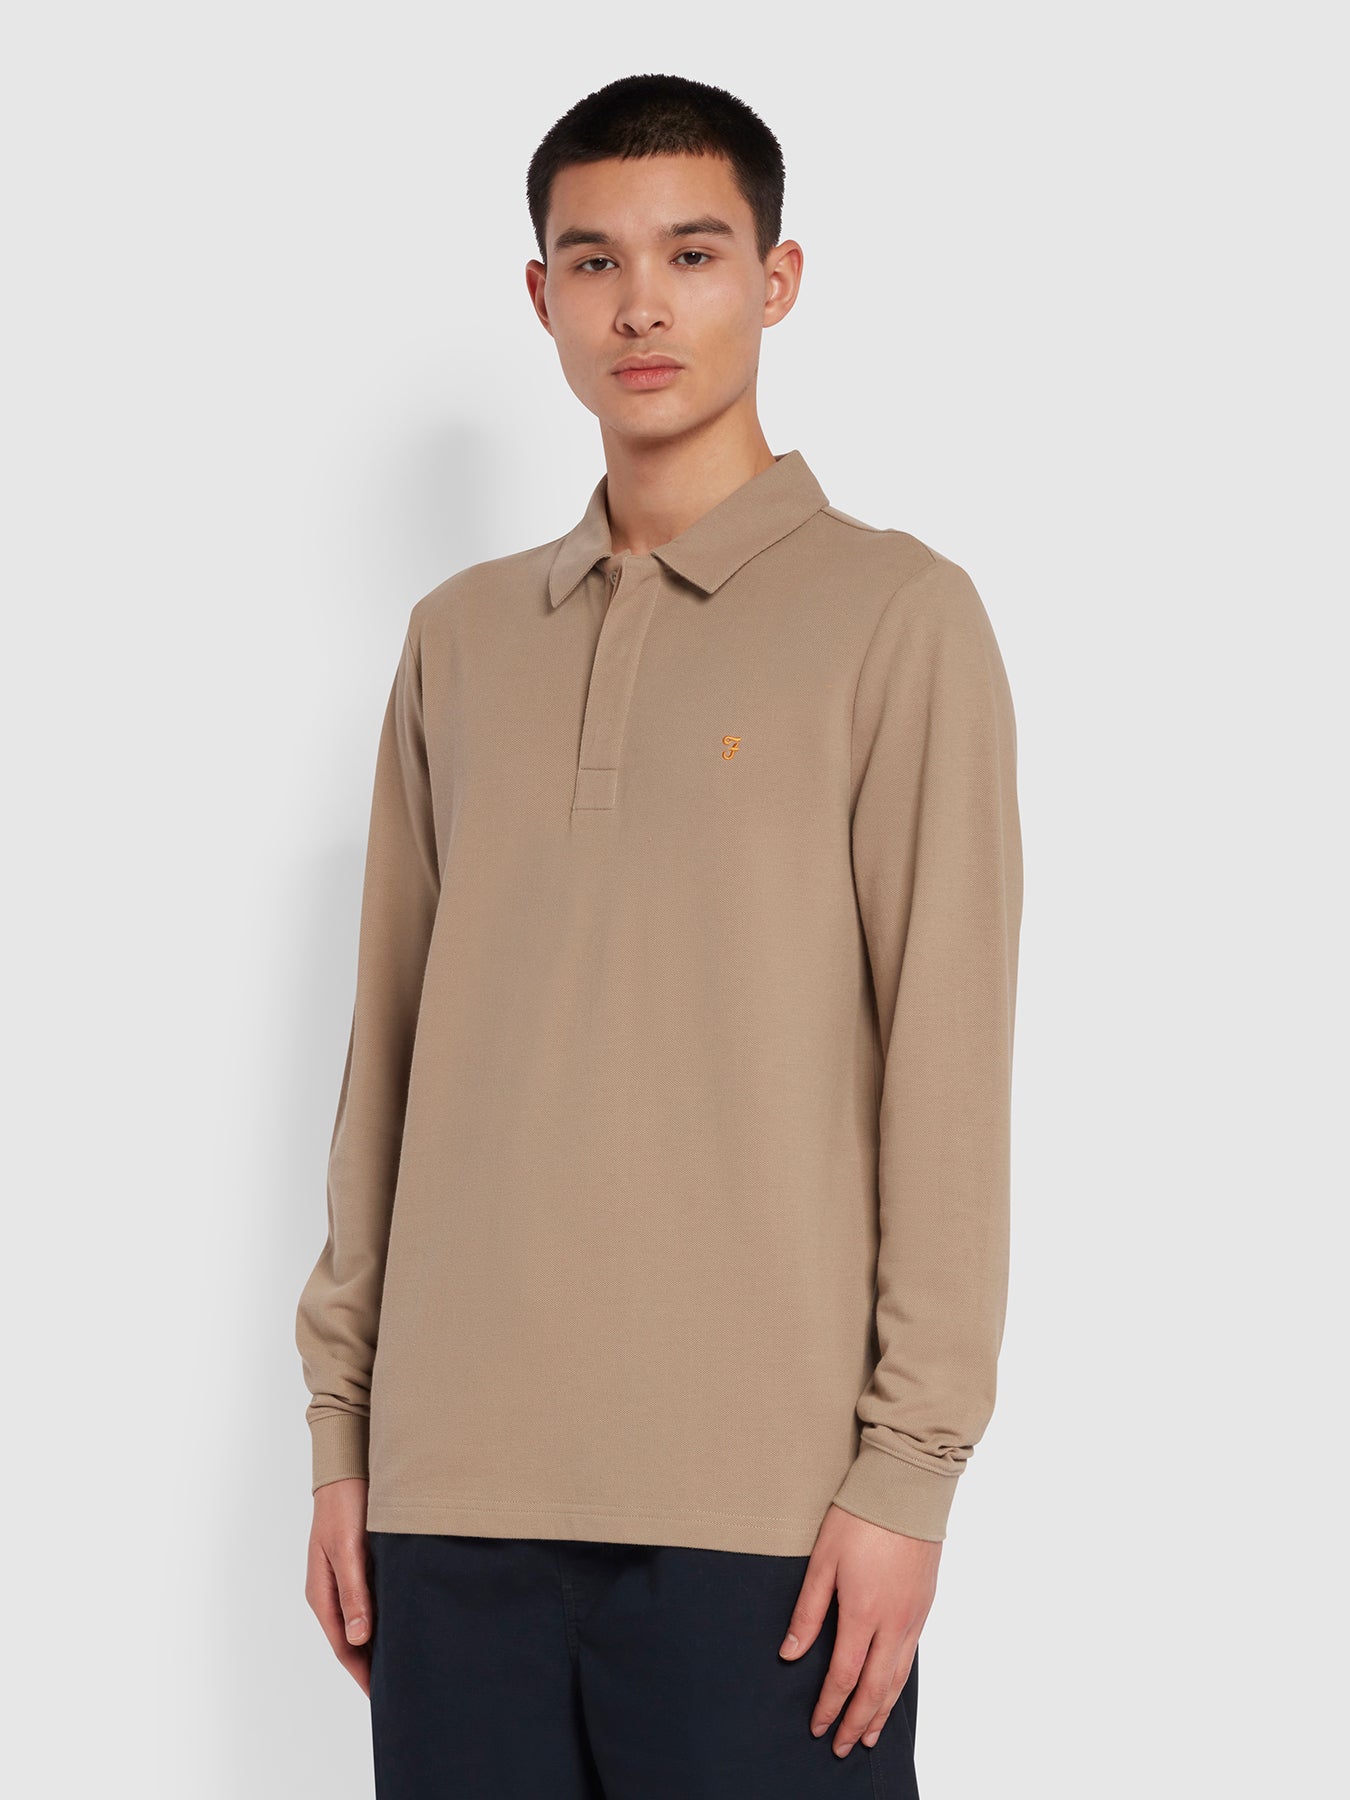 View Haslam Slim Fit Long Sleeve Organic Cotton Polo Shirt In Smoky Brown information